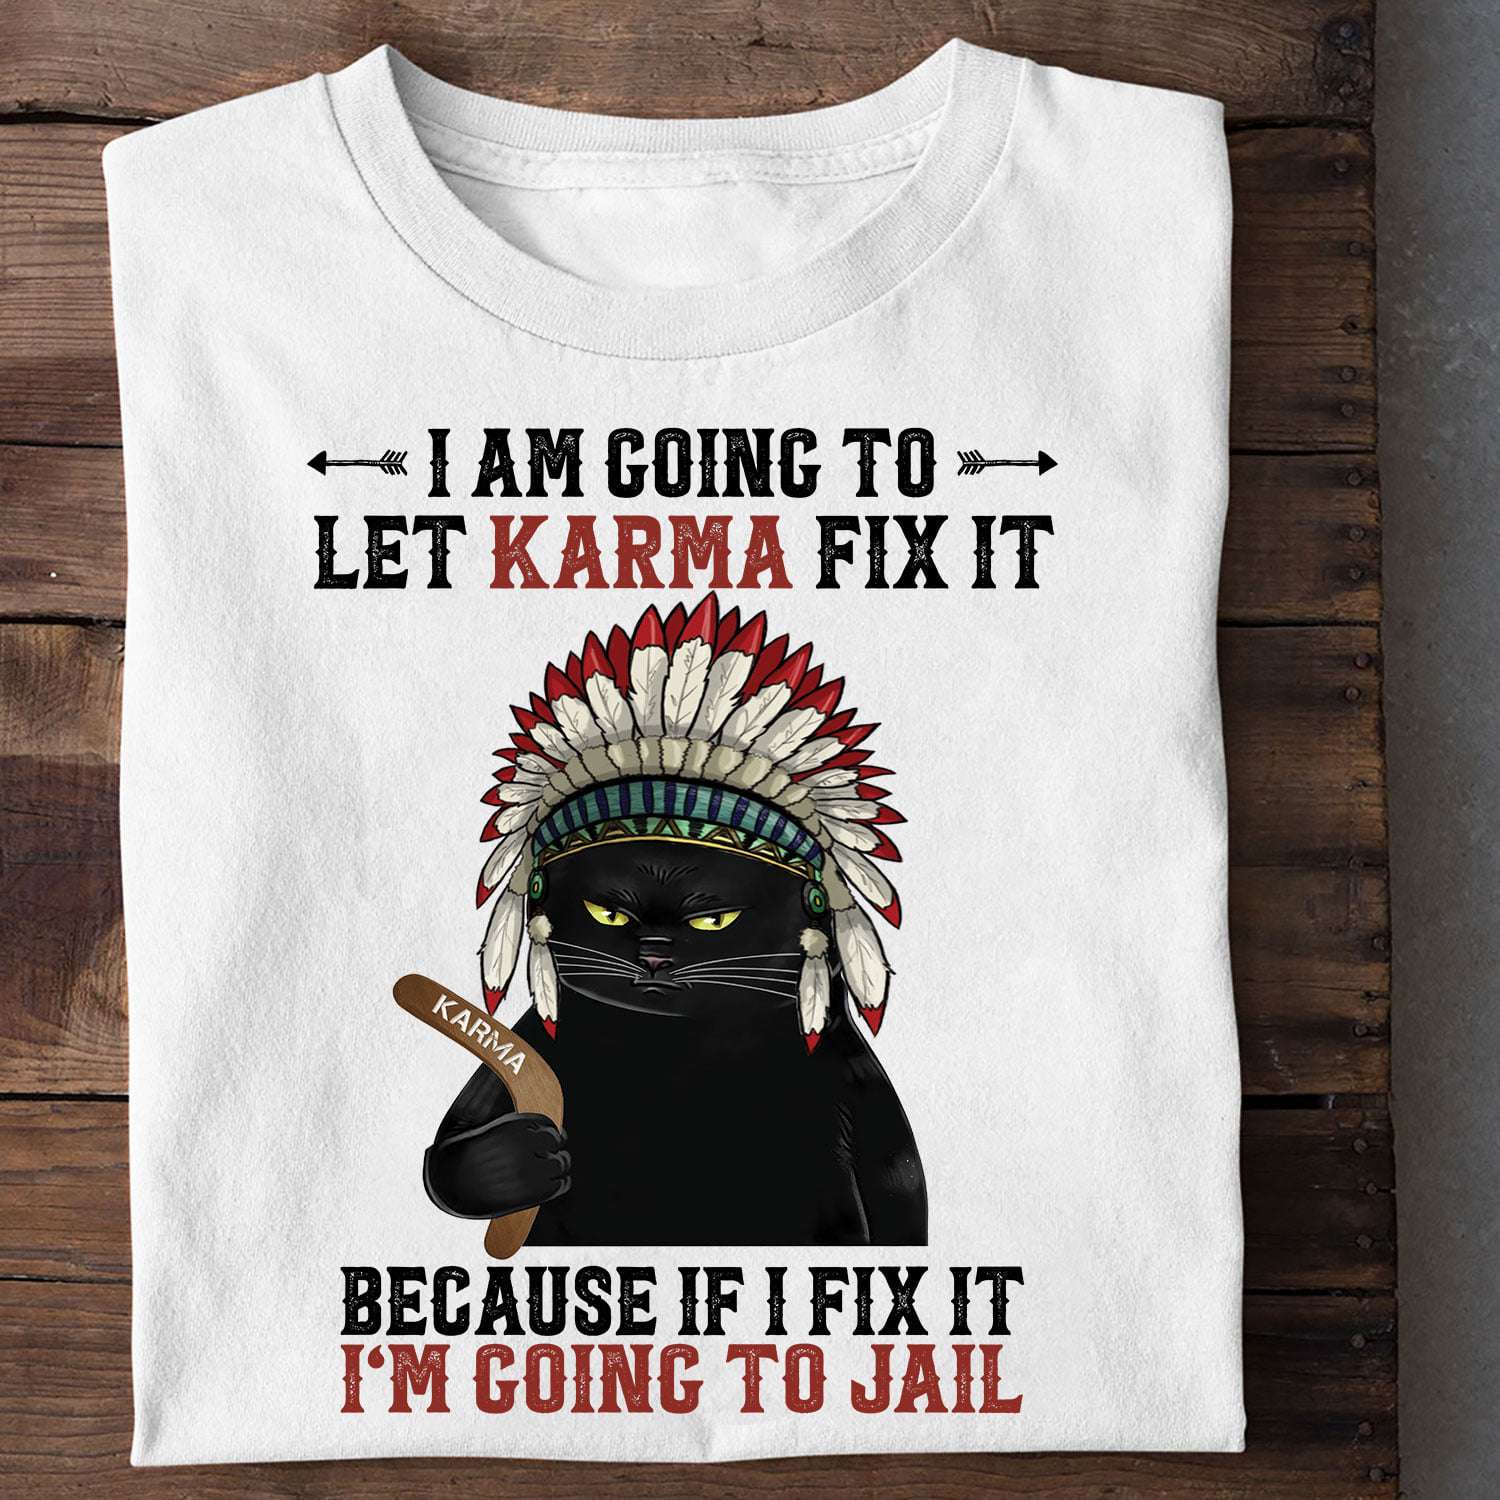 Native Black Cat - I am going to let karma fix it because if i fix it i'm going to jail